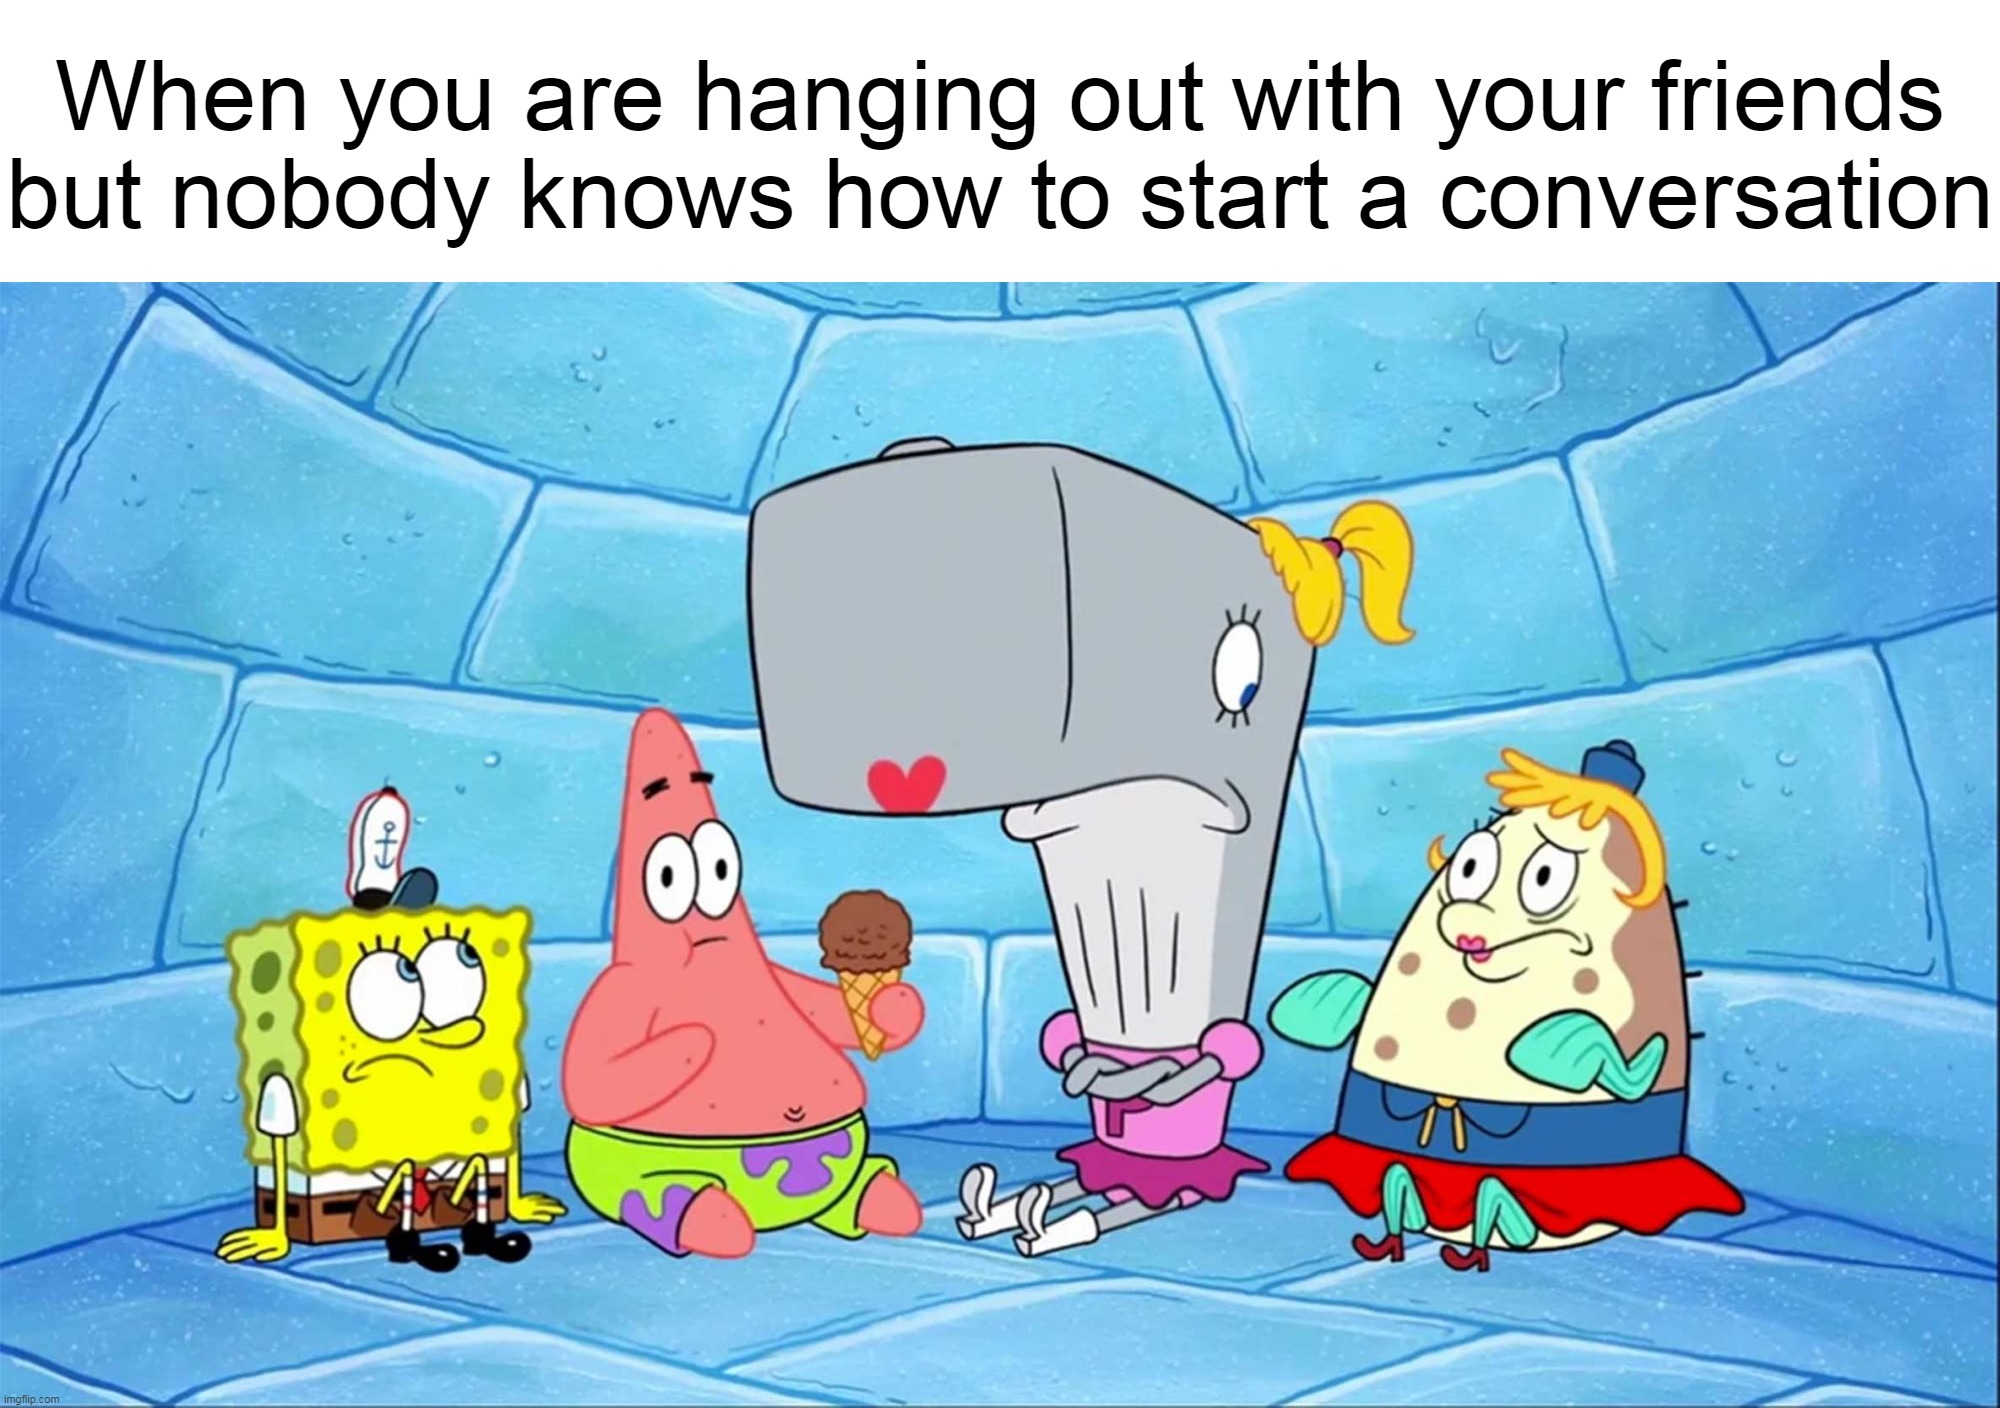  When you are hanging out with your friends but nobody knows how to start a conversation | image tagged in meme,memes,humor,relatable | made w/ Imgflip meme maker